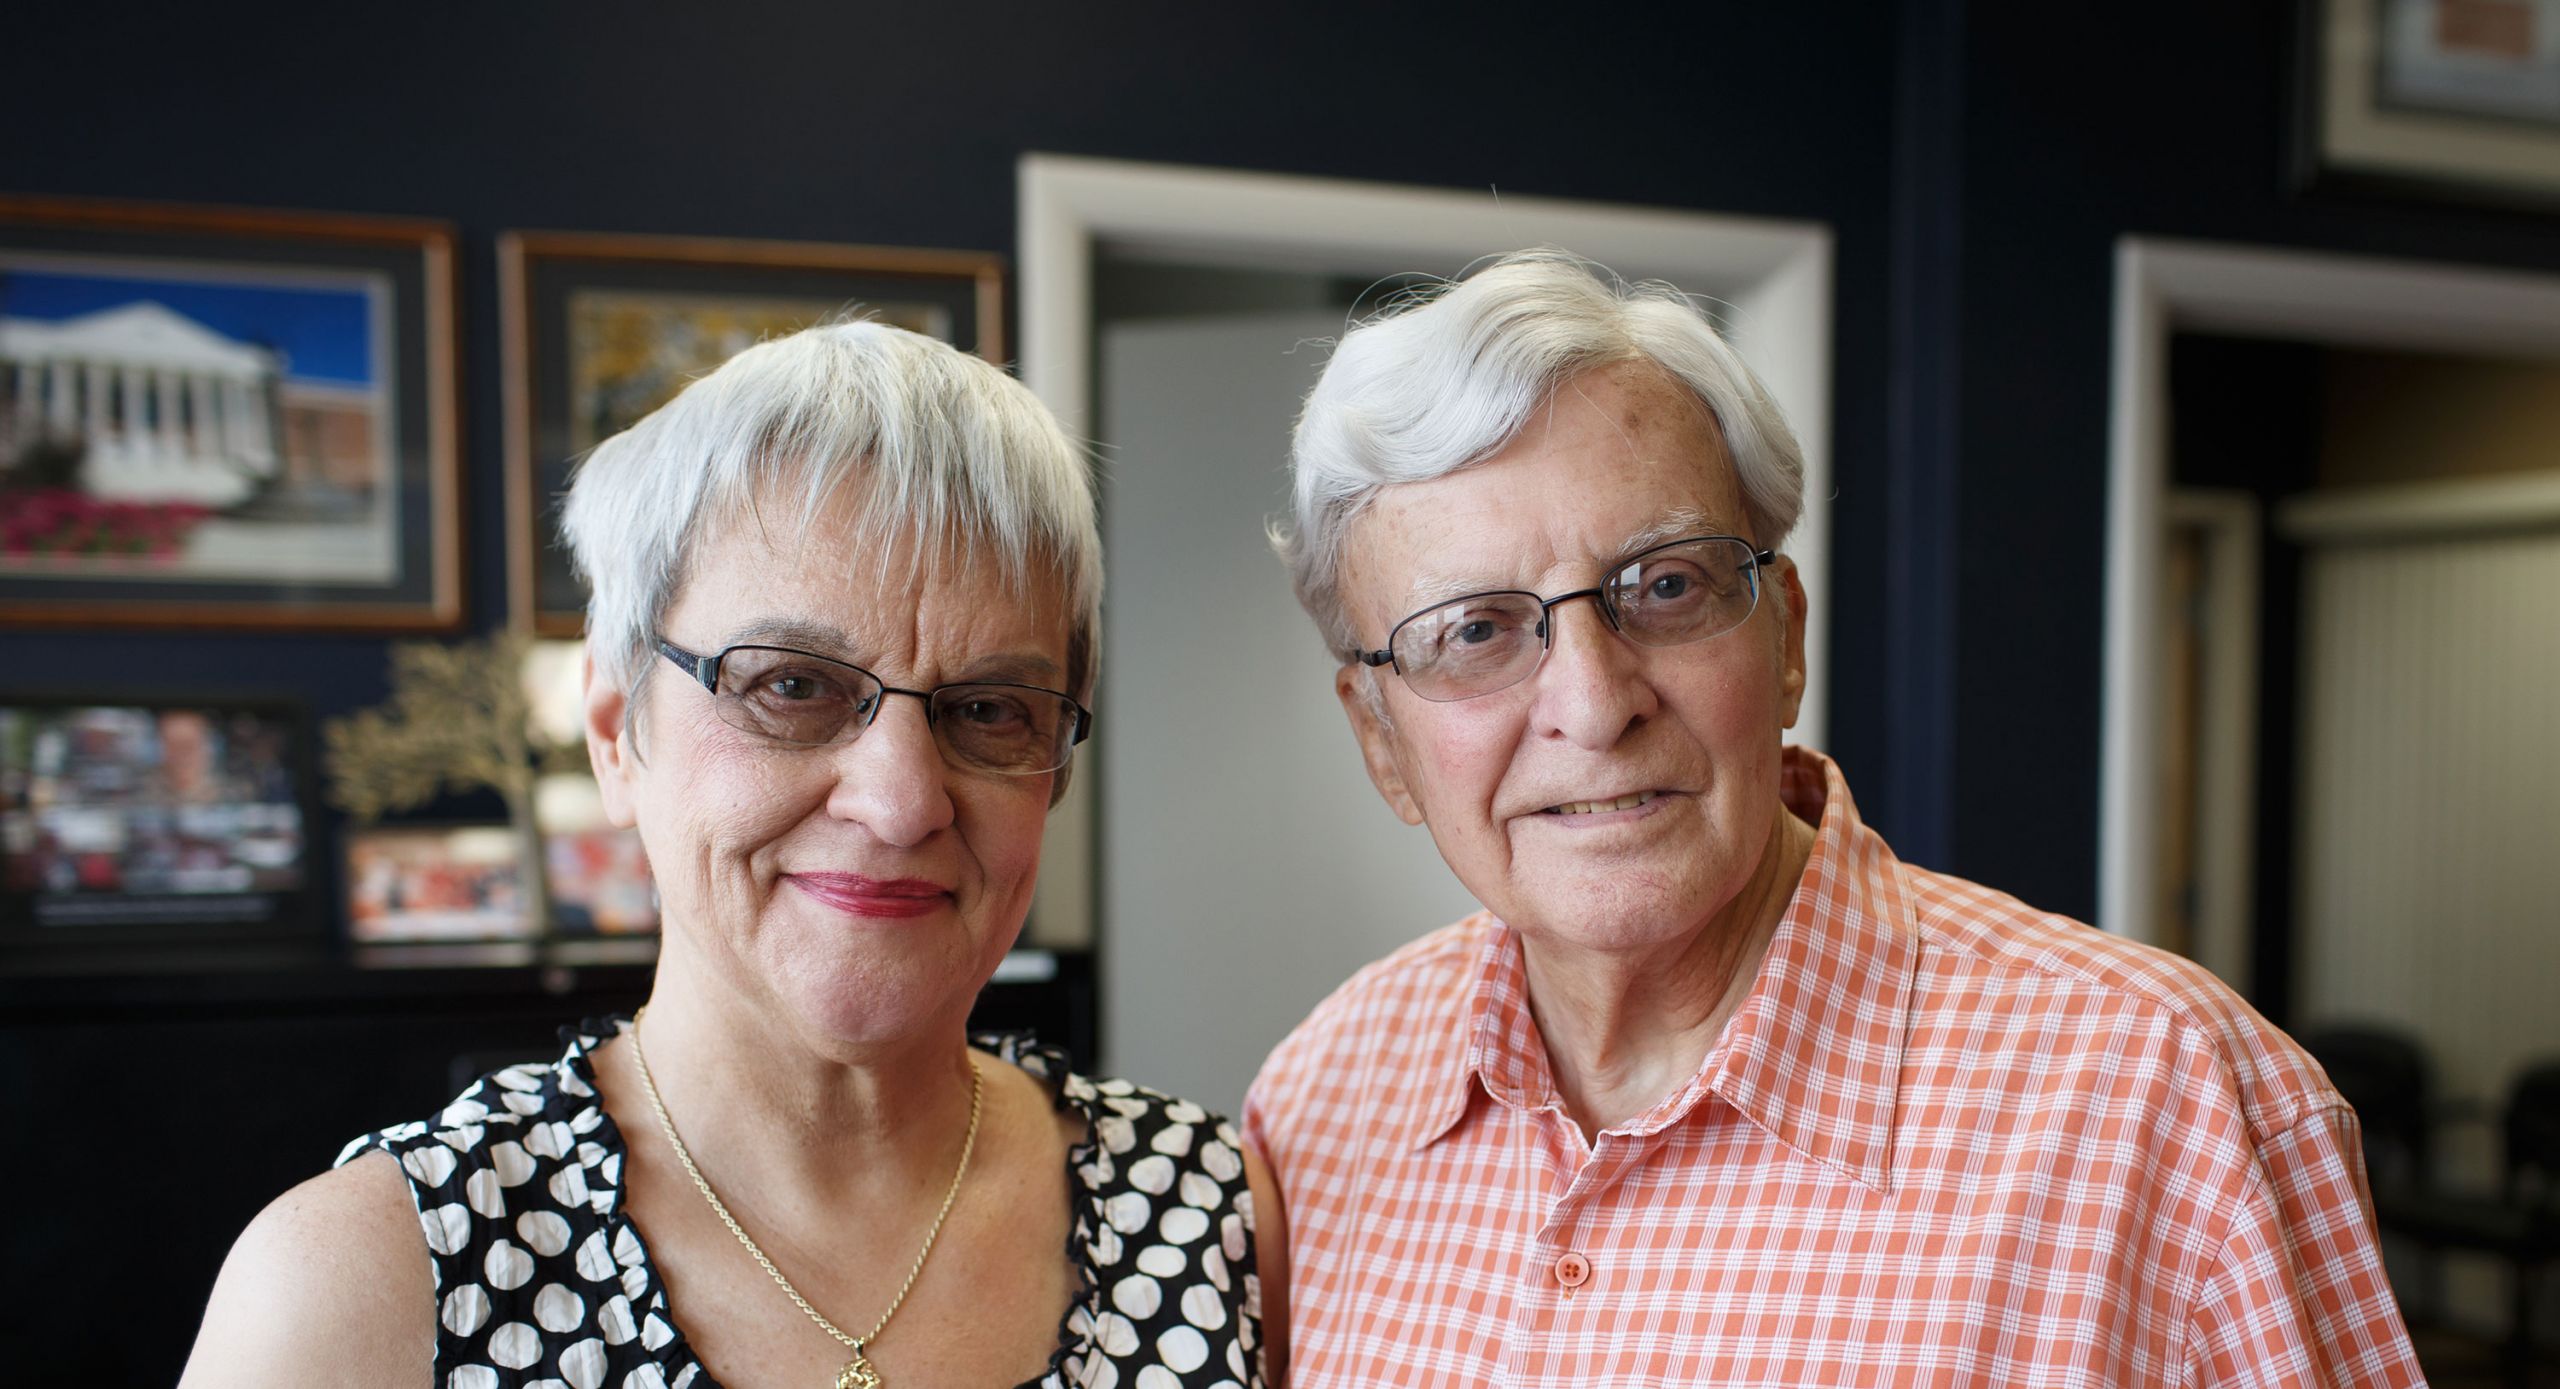 As longtime supporters of Liberty University, retired history professor Dr. Cline Hall and his wife, Beverly, knew they wanted to play a role in the university’s future.